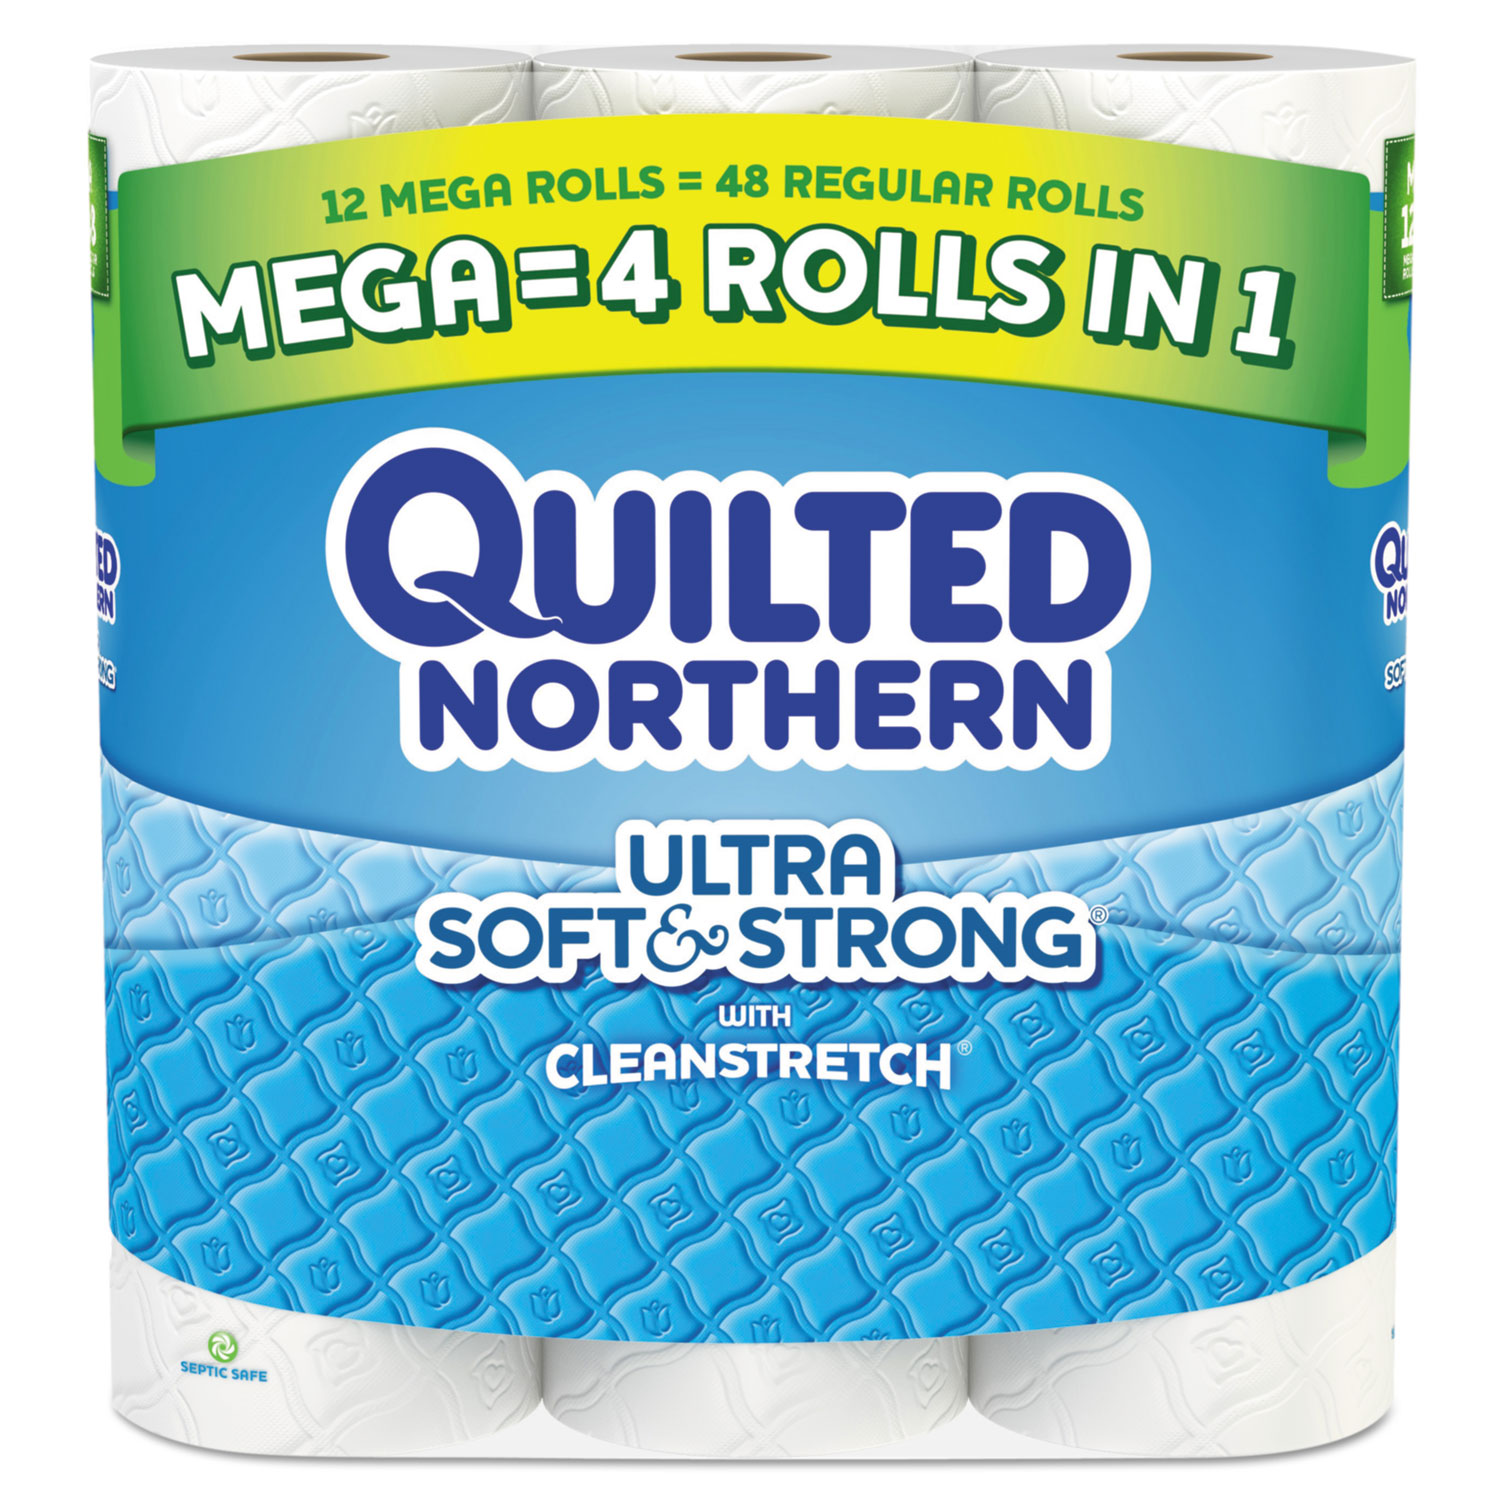 Ultra Soft & Strong Bathroom Tissue, 2-Ply, White, 12 Rolls per Pack, 4 Pks/Ct